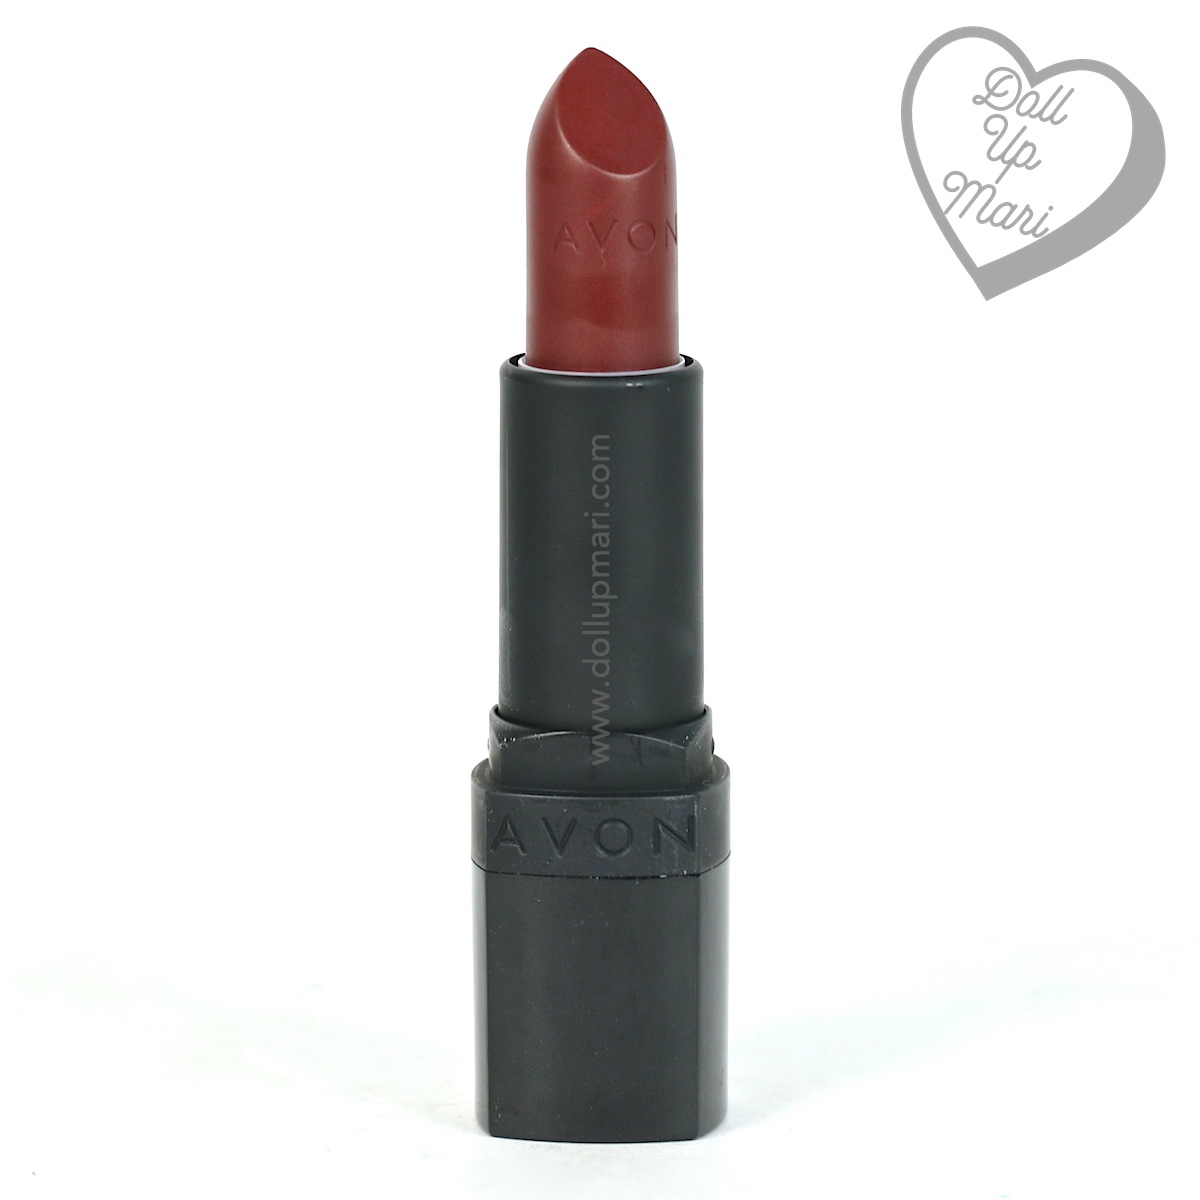 Pack shot of Superb Wine shade of AVON Perfectly Matte Lipstick 